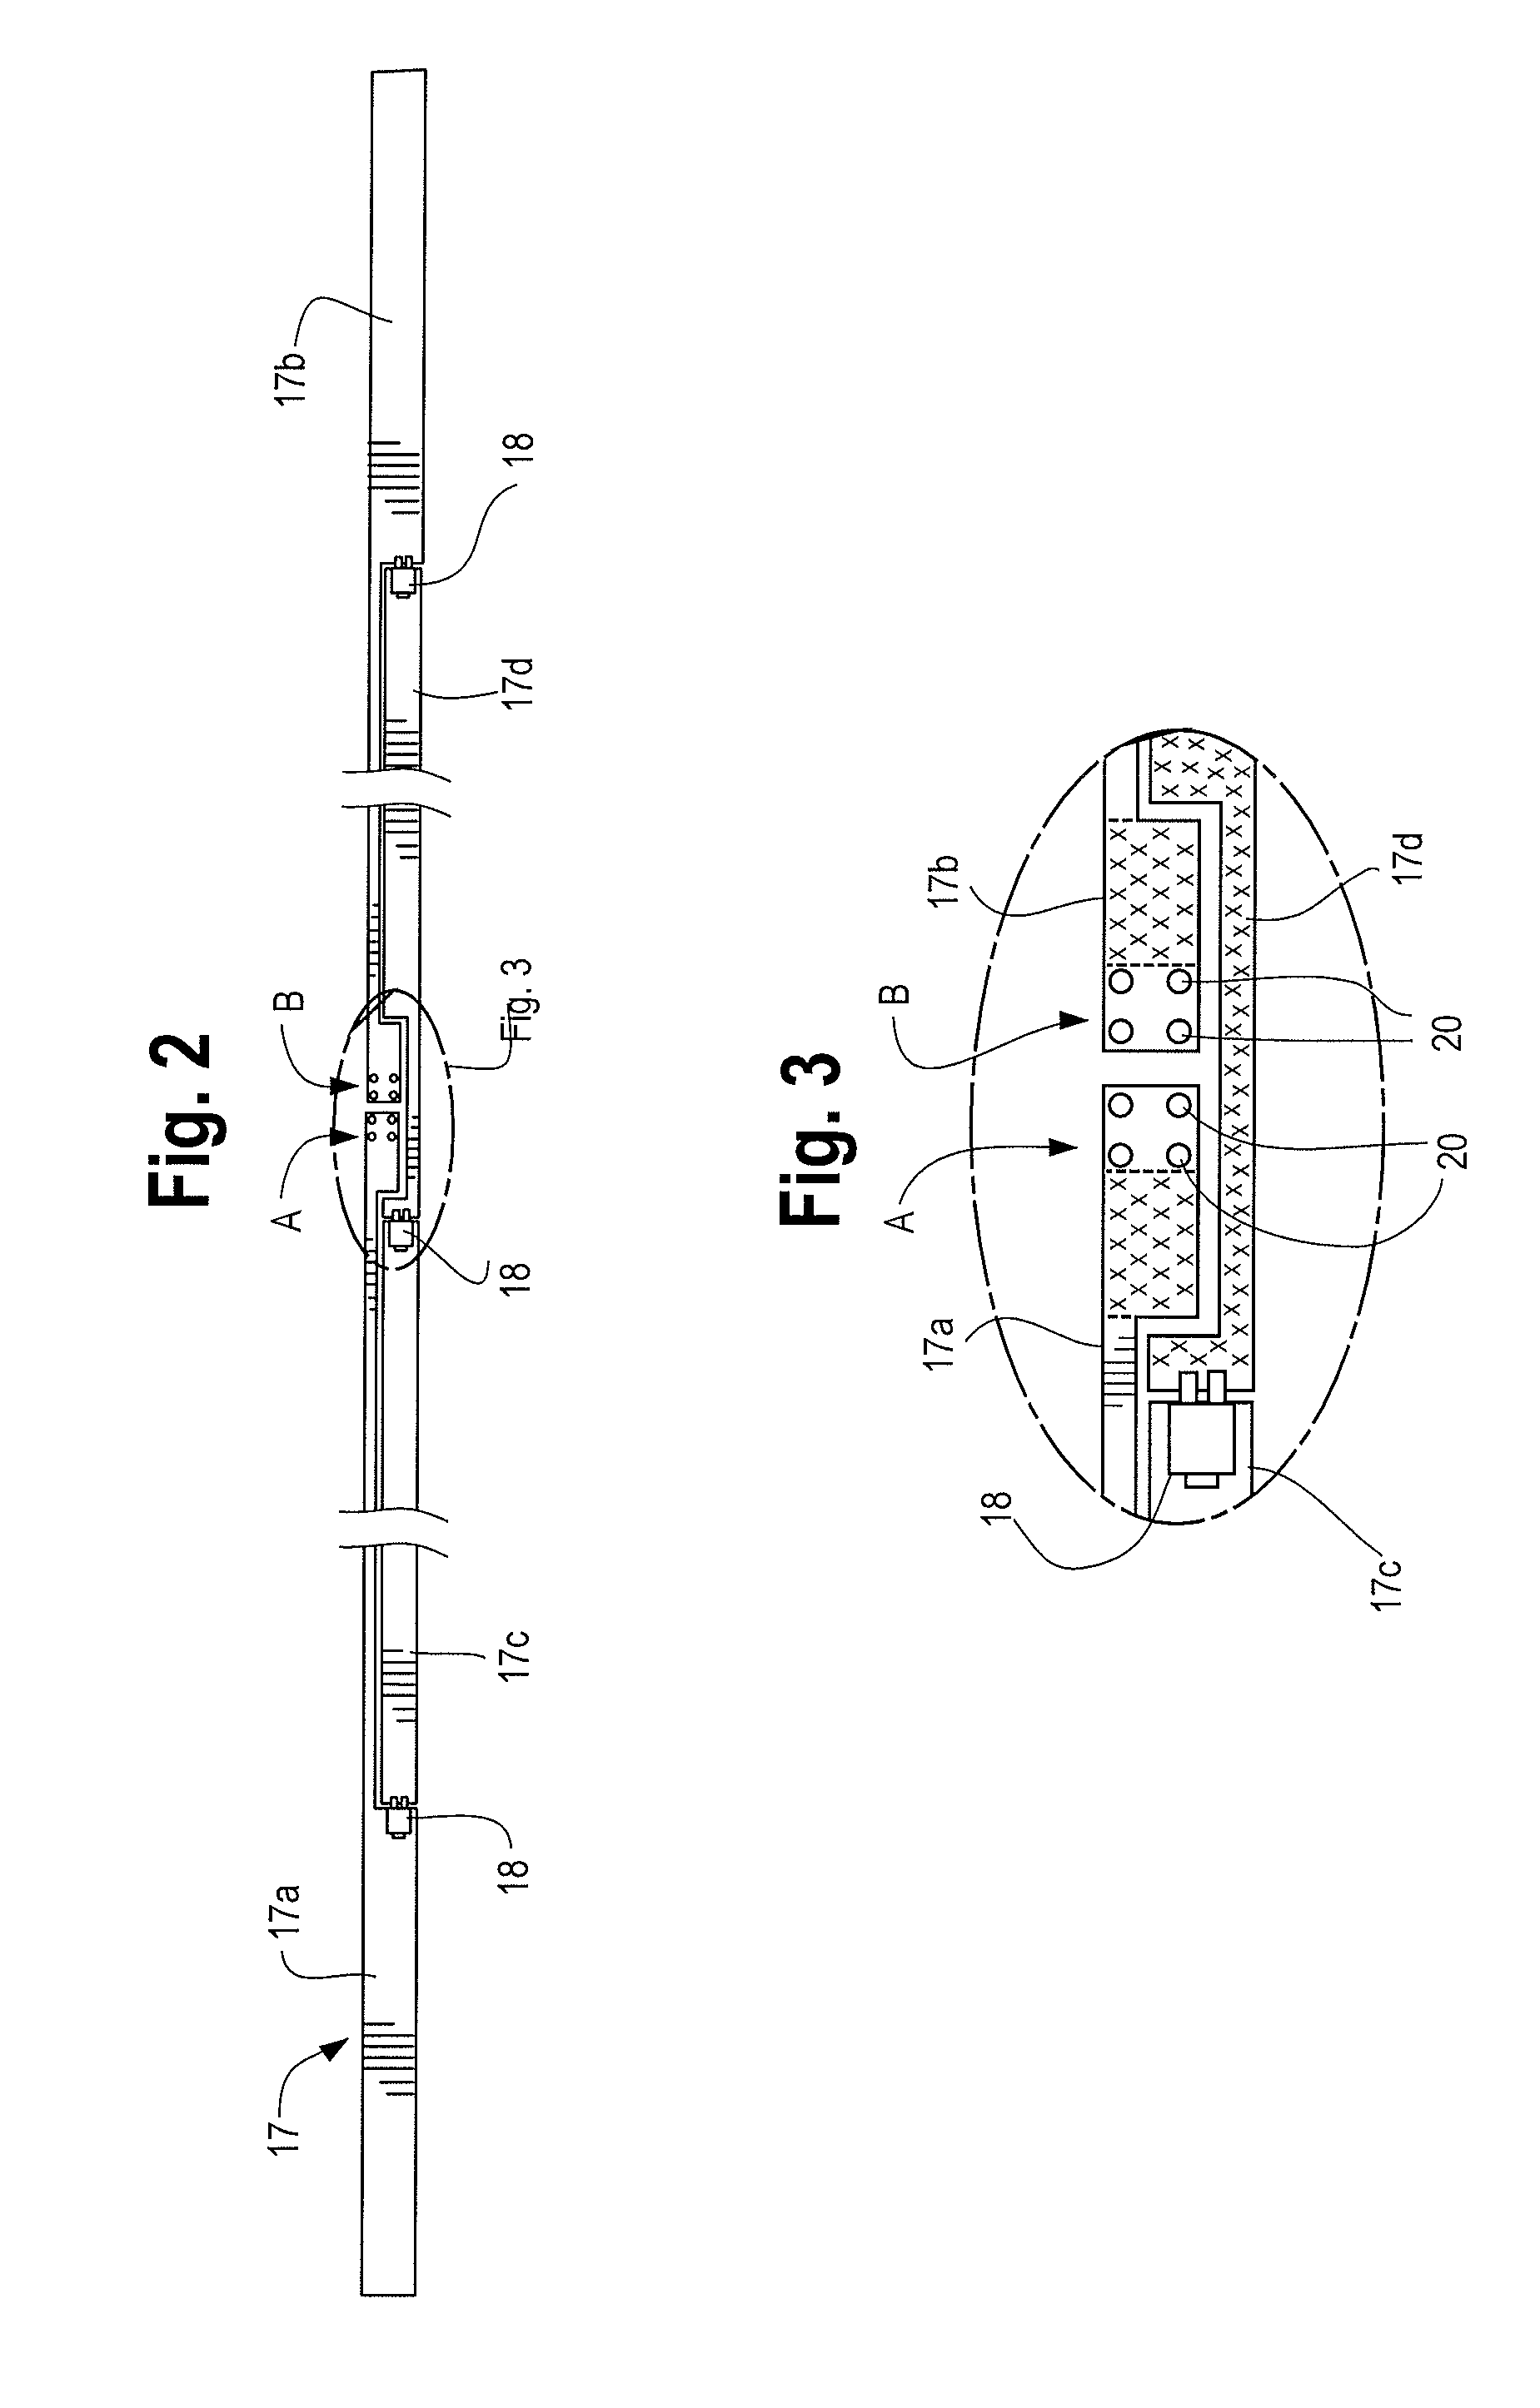 Cable Connectors for a Photovoltaic Module and Method of Installing